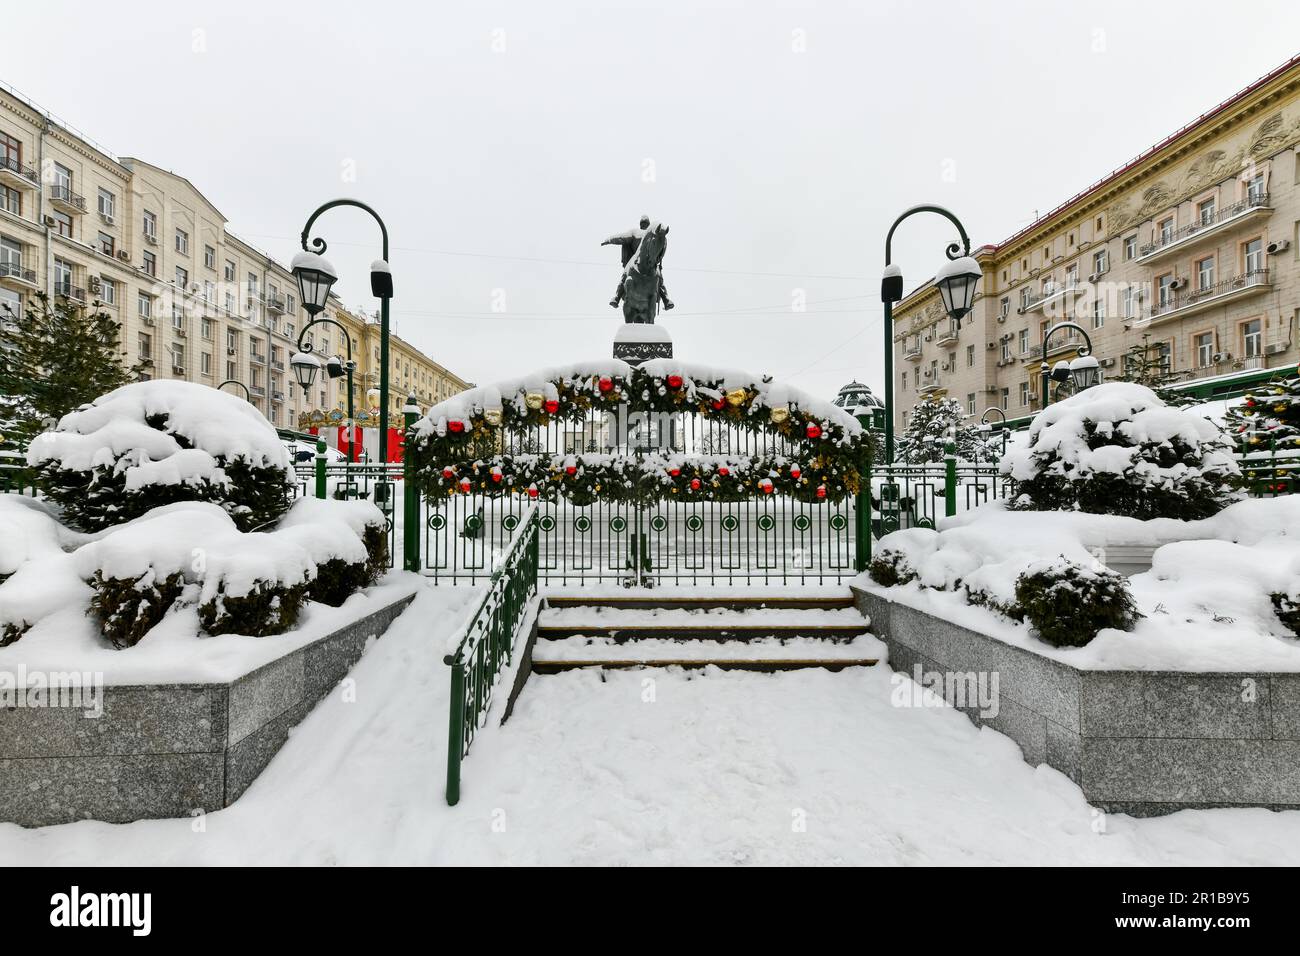 Moscow, Russia - Jan 23, 2022: Statue of Yuriy Dolgorukiy on Tverskaya street in Moscow, Russia during the winter. Stock Photo